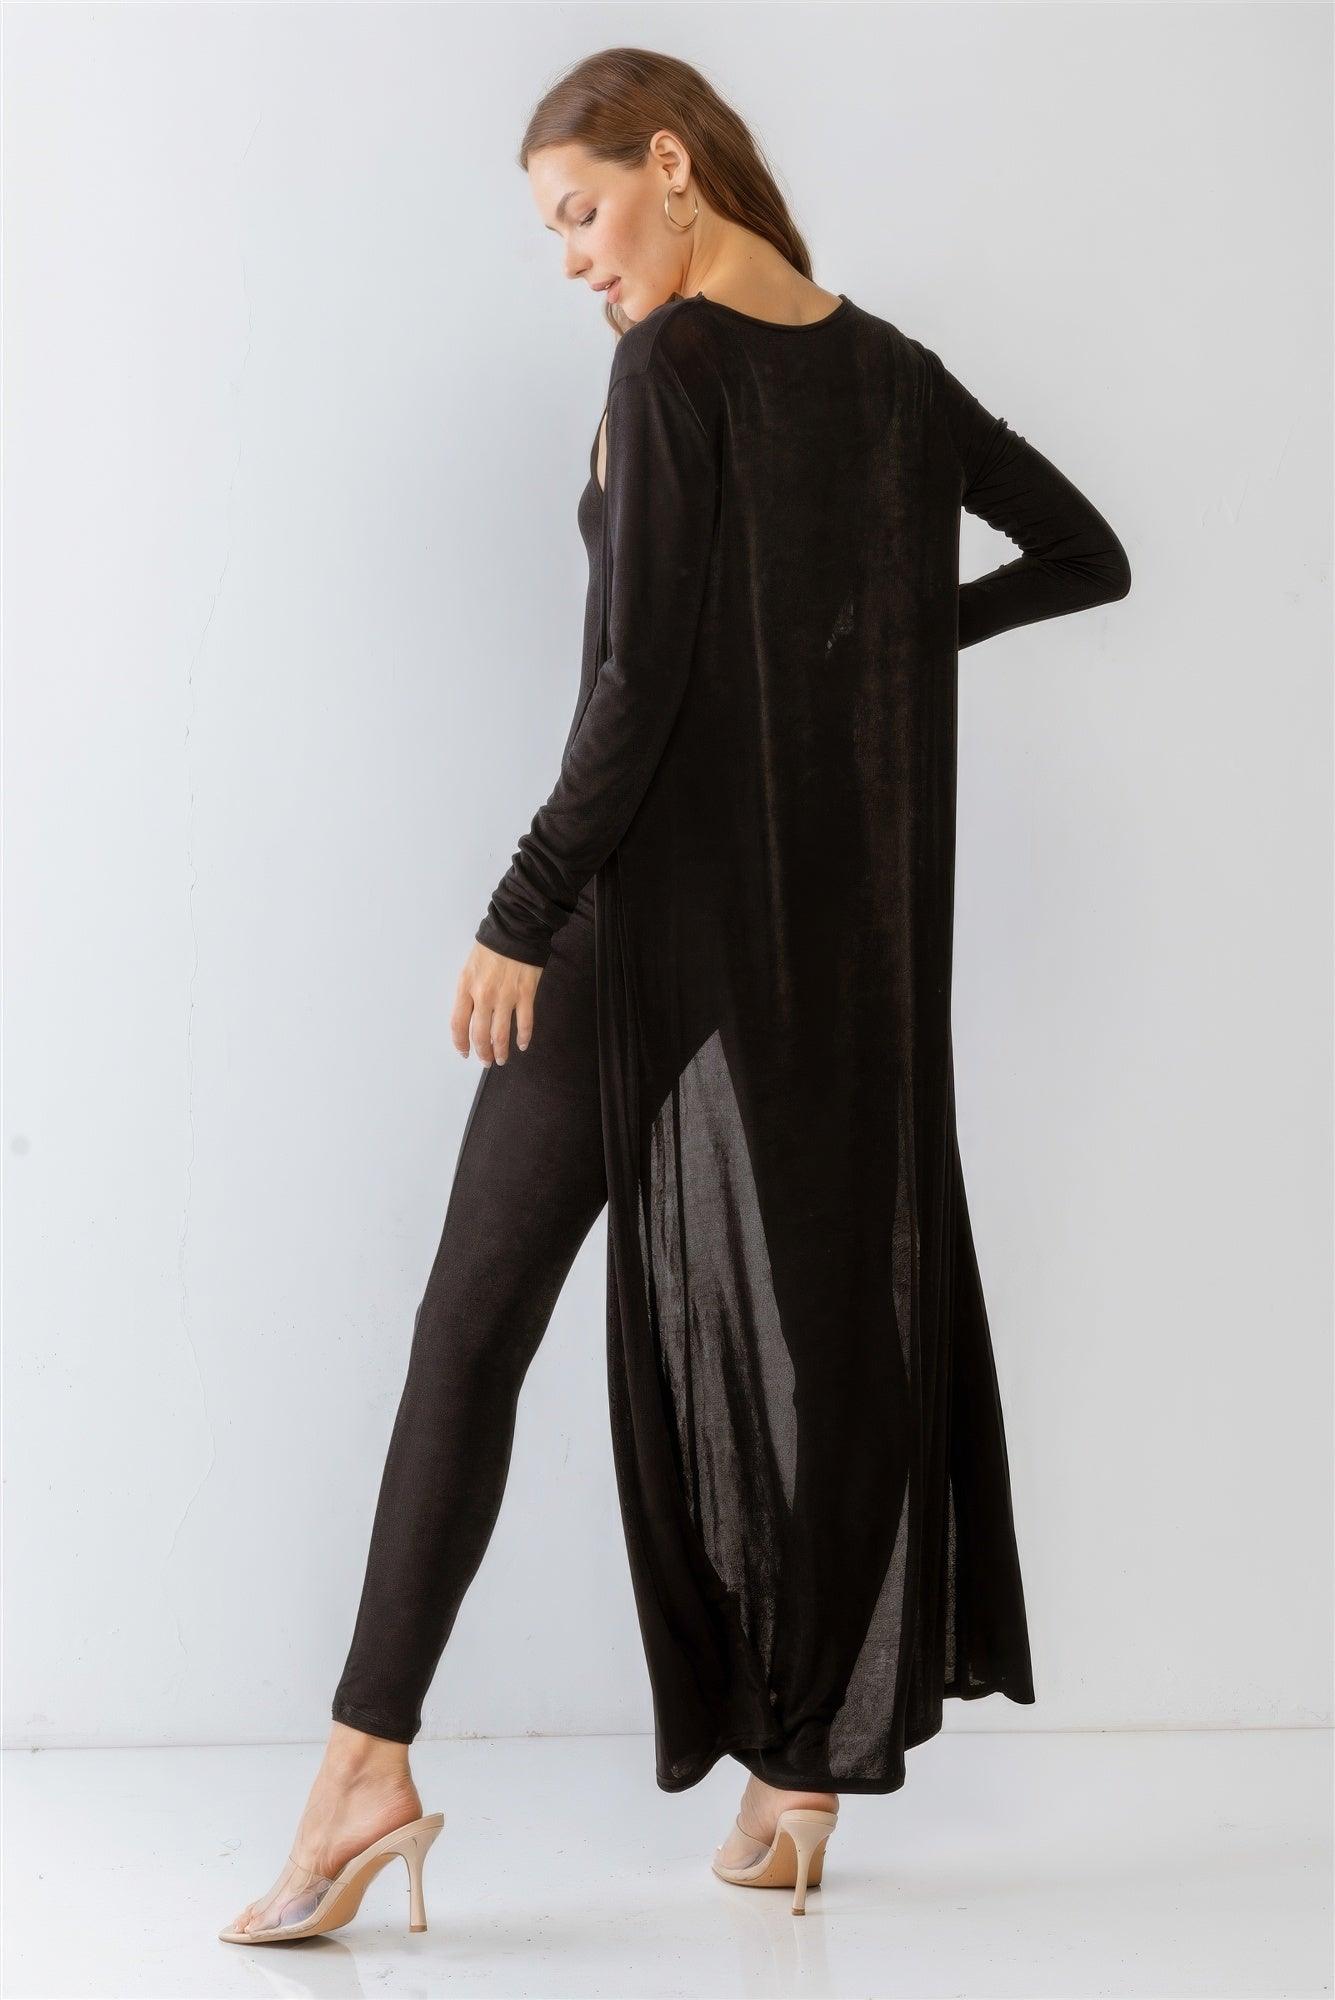 Black Sleeveless Cut-out Detail Slim Fit Jumpsuit & Open Front Long Sleeve Cardigan Set - AMIClubwear